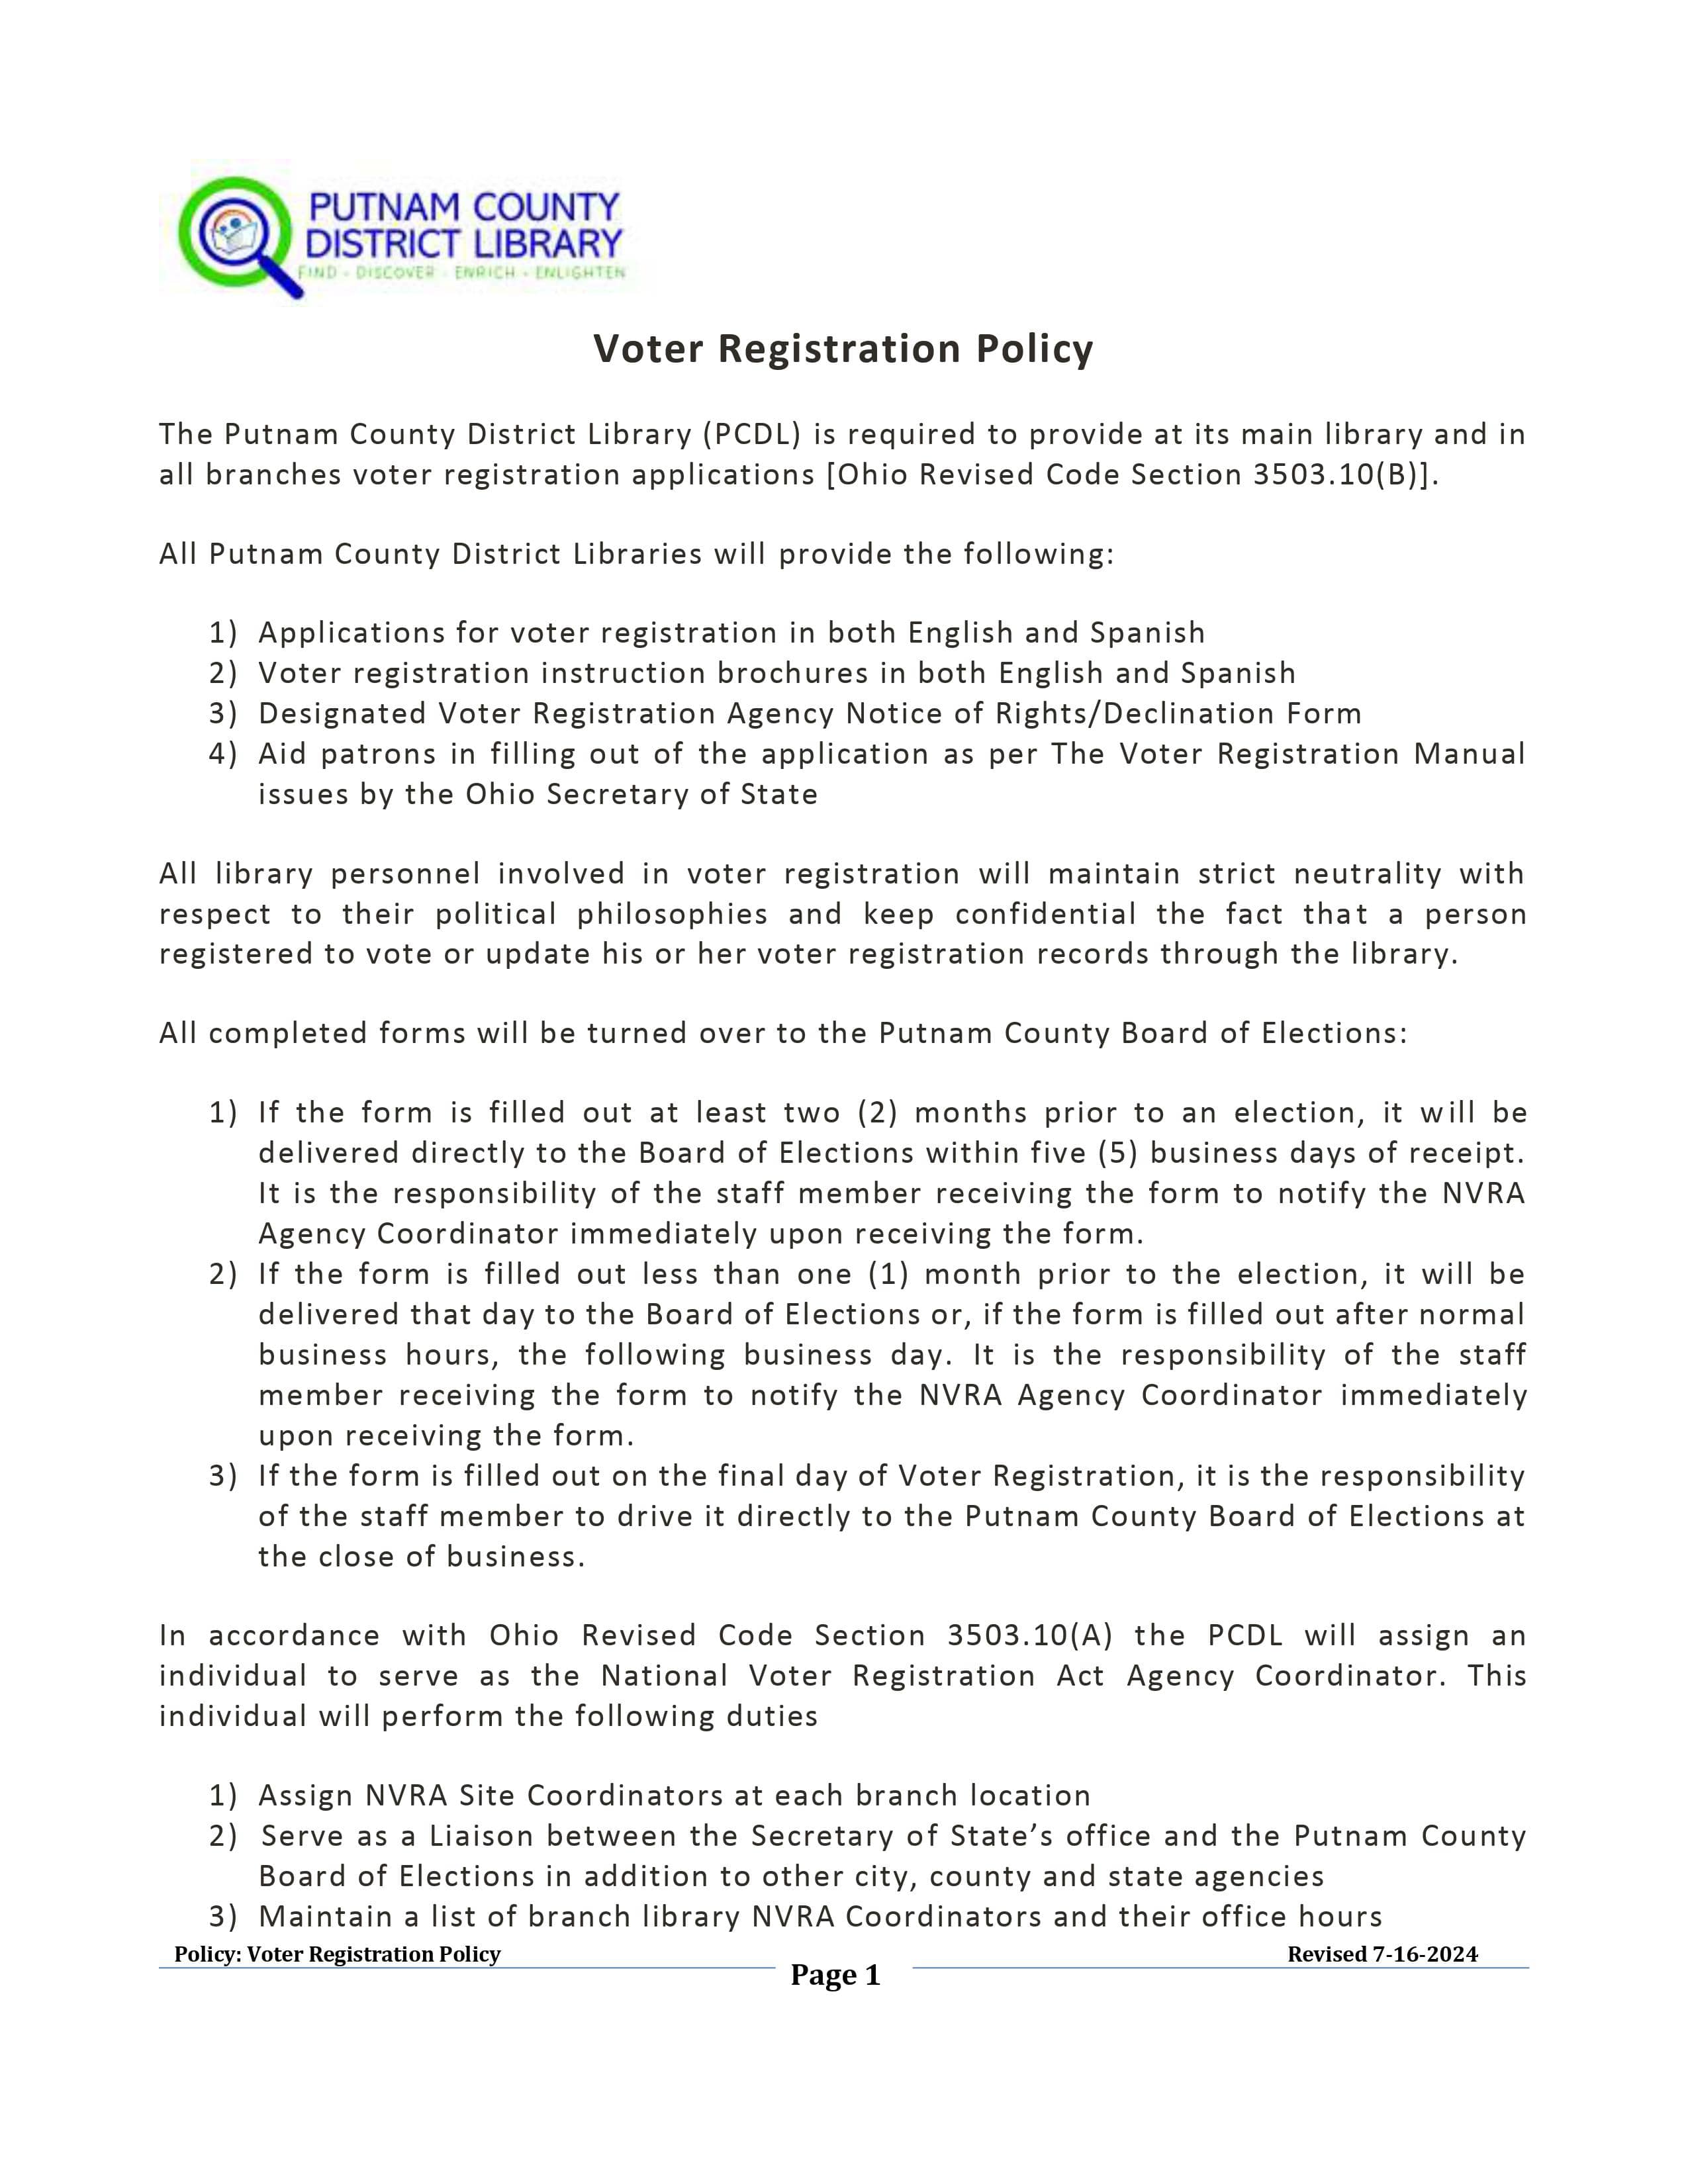 Voter Registration Policy page 1 call 419-523-3747 ext 3 for more details